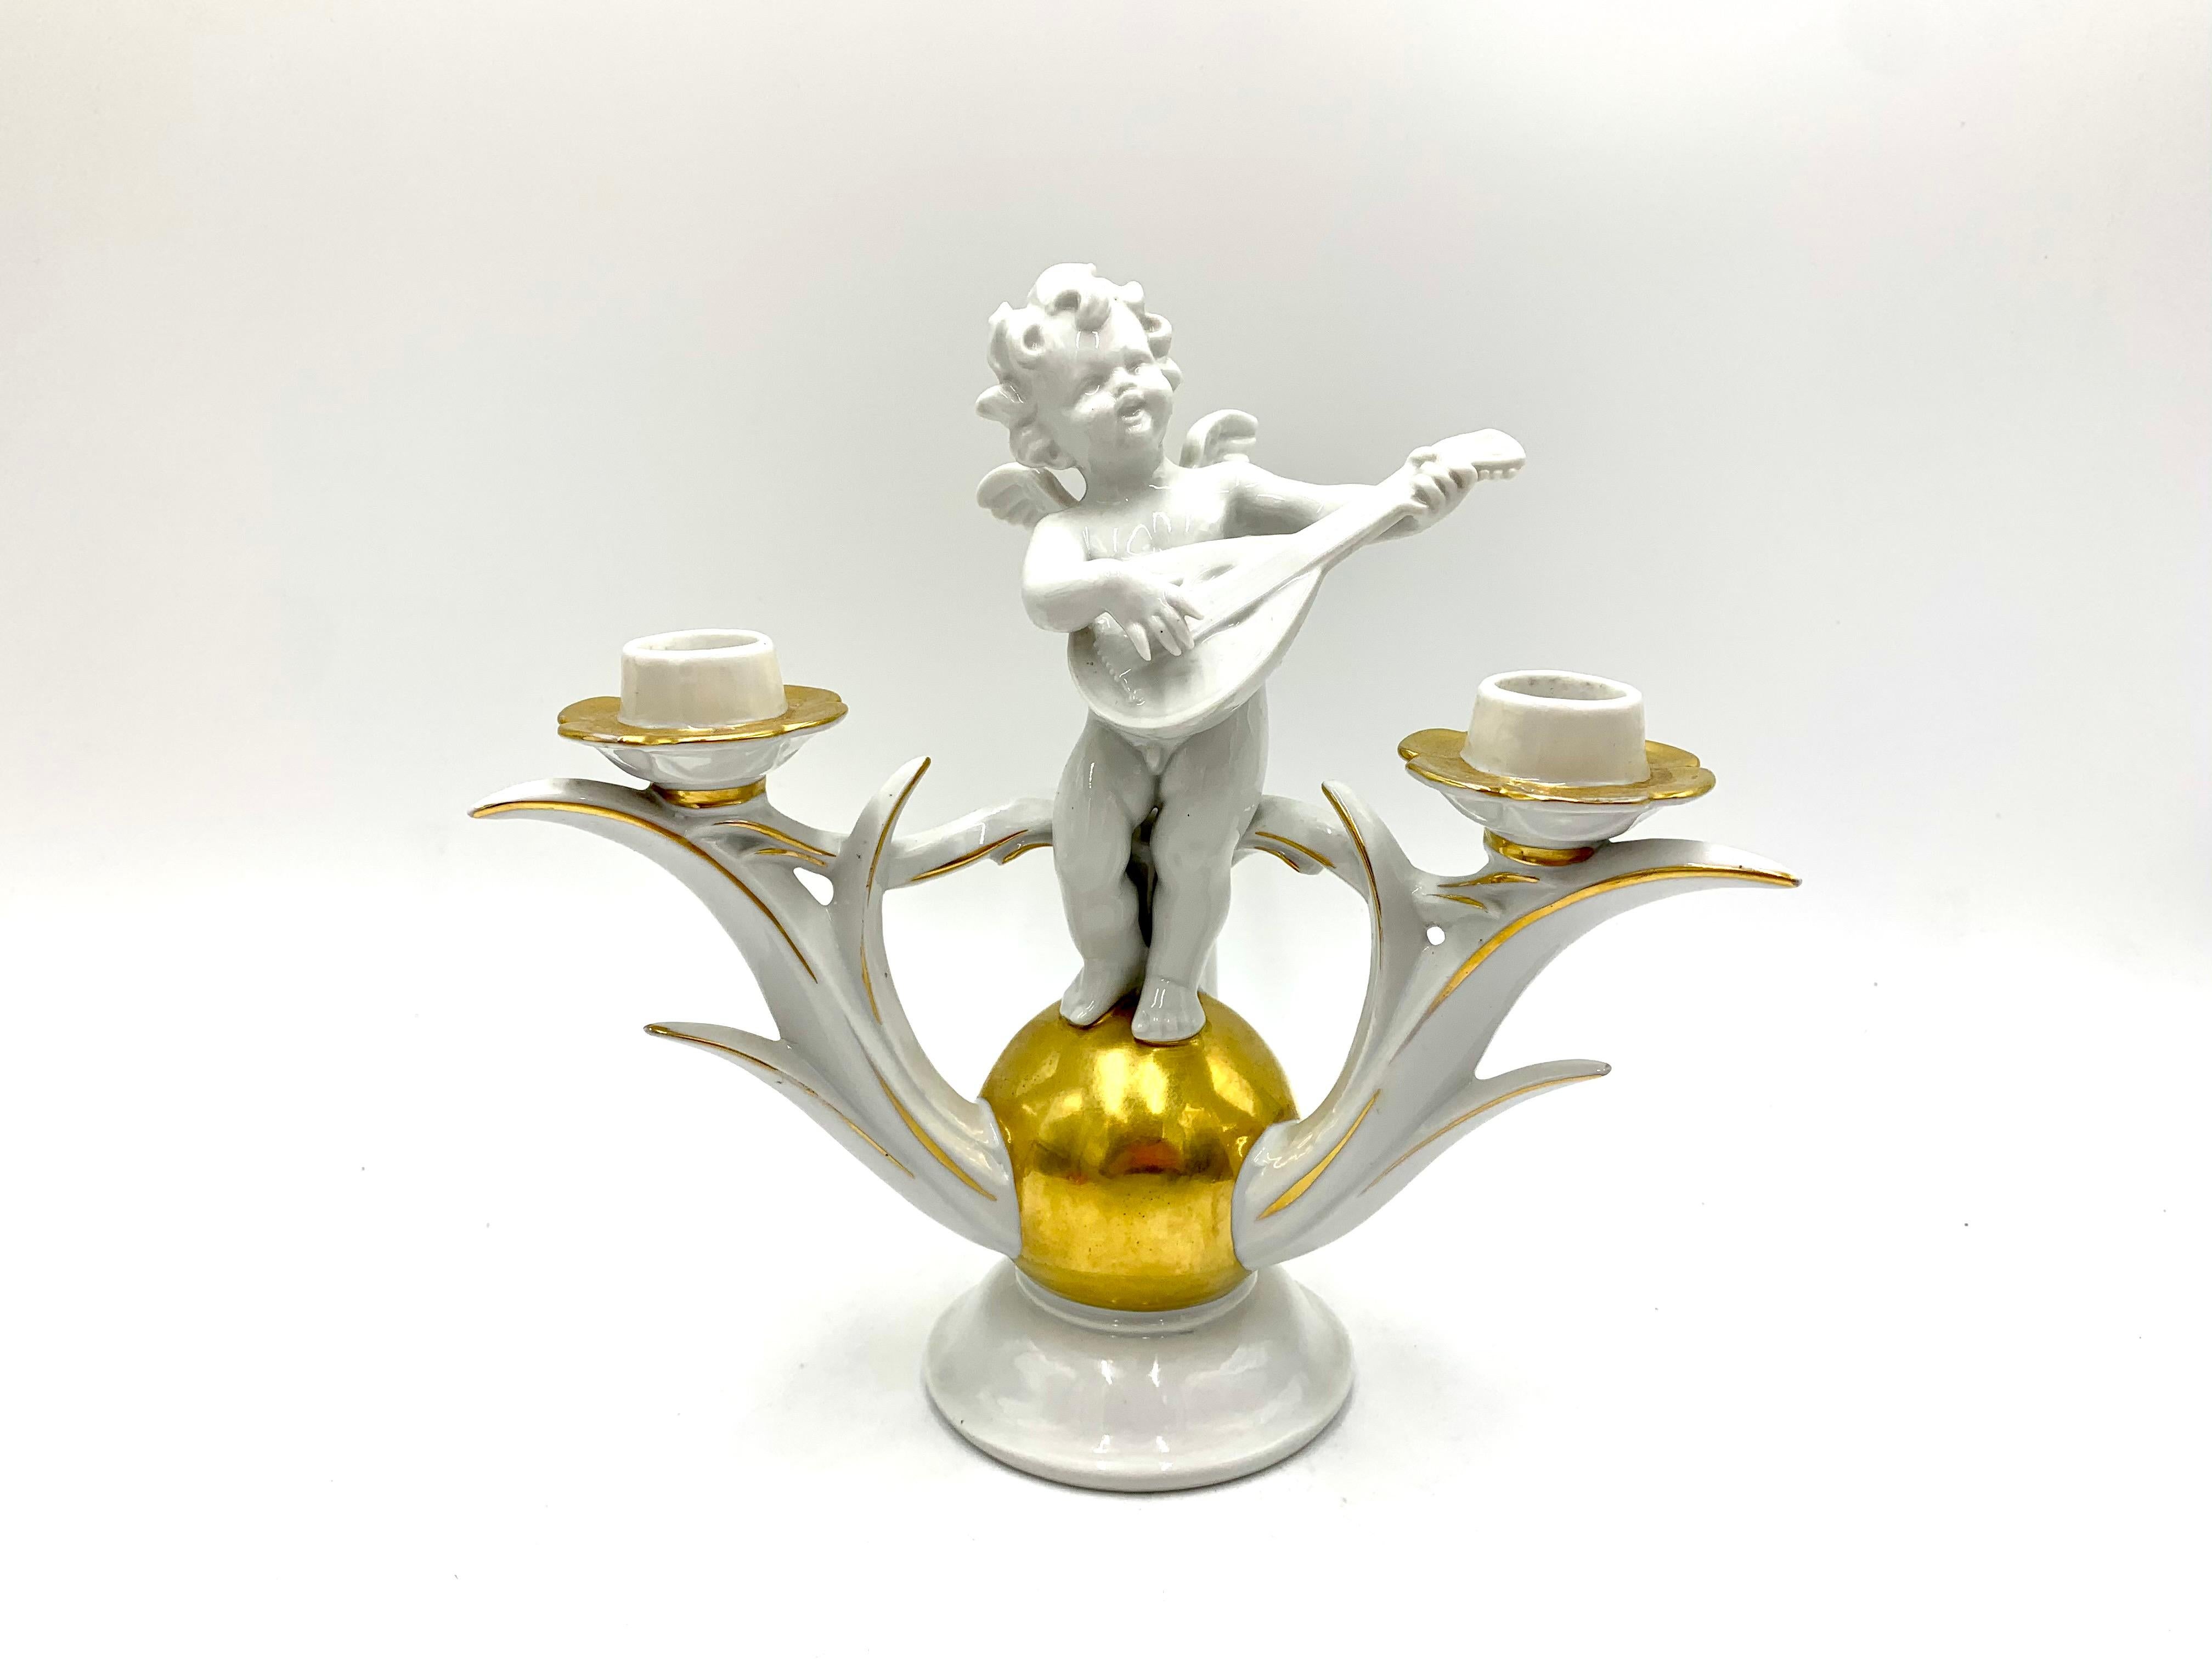 A three-arm porcelain candlestick with gilding and a cupid motif with a mandolin on a golden ball. Signed with the orange Kunstporzellan signature. Manufactured in Germany by the renowned German manufacturer Carl Scheidig from Grafenthal, Thuringia,